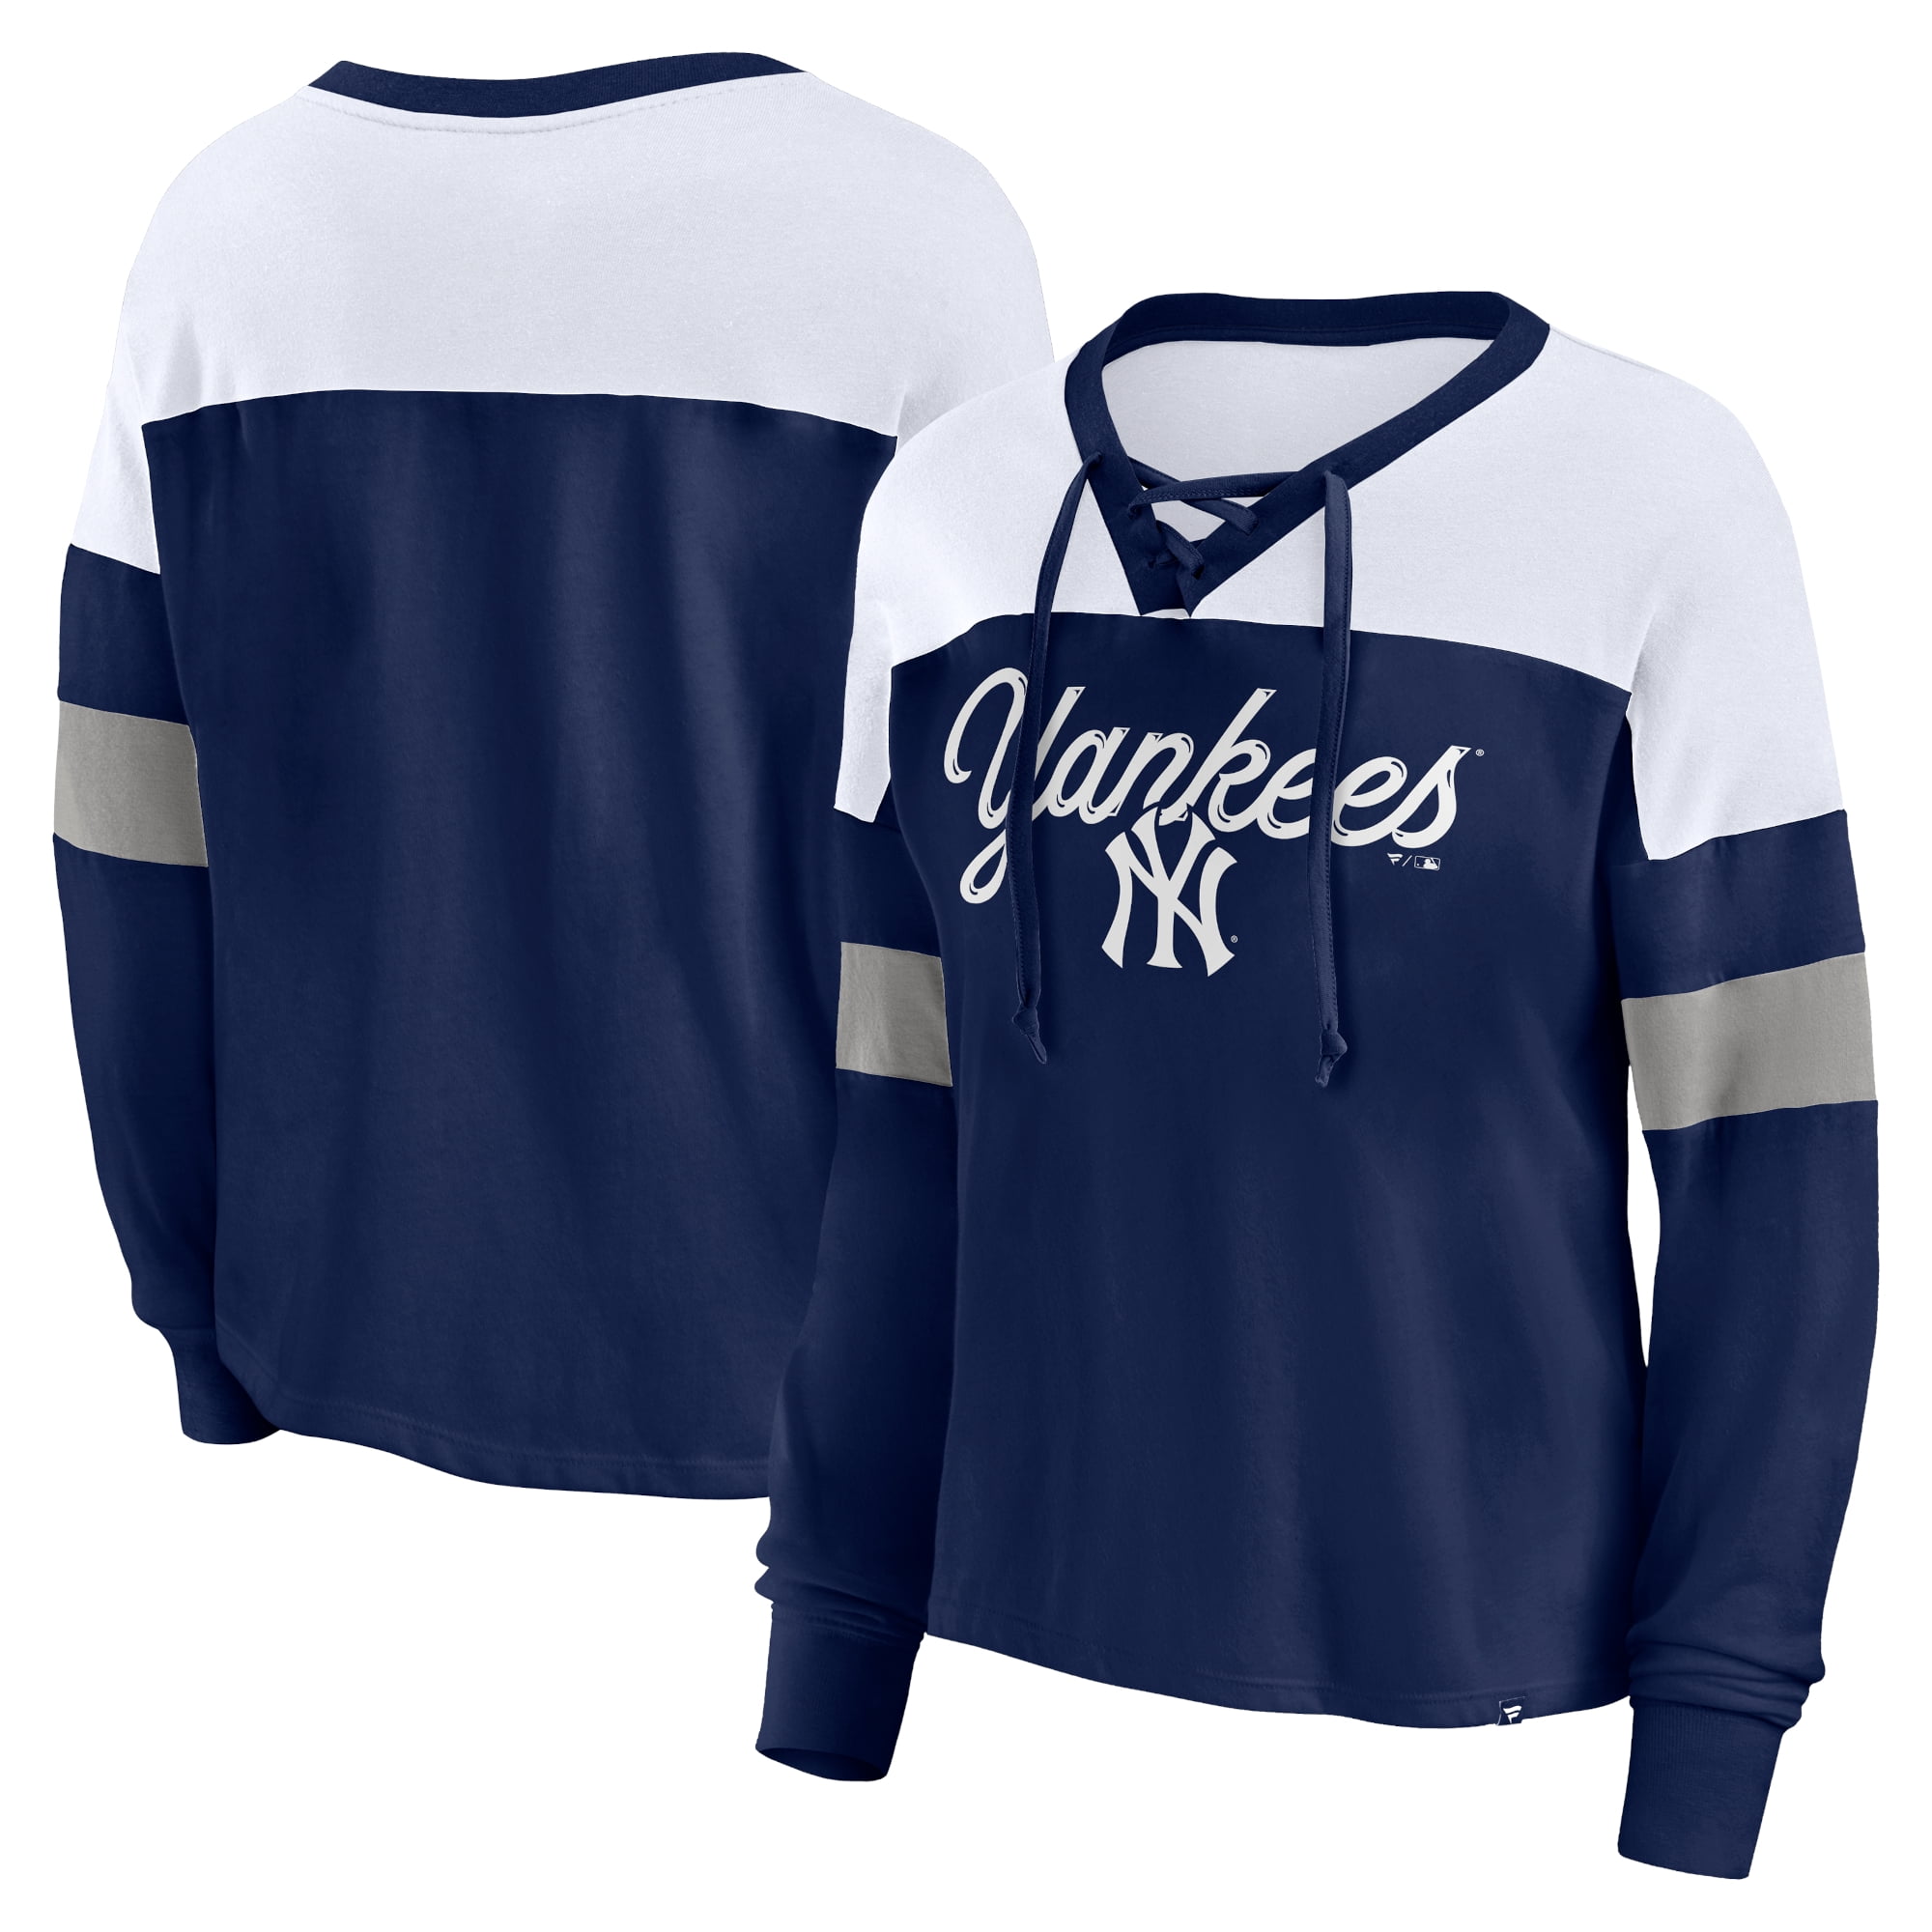 Women's Fanatics Branded Navy/White New York Yankees Even Match Lace-Up  Long Sleeve V-Neck T-Shirt